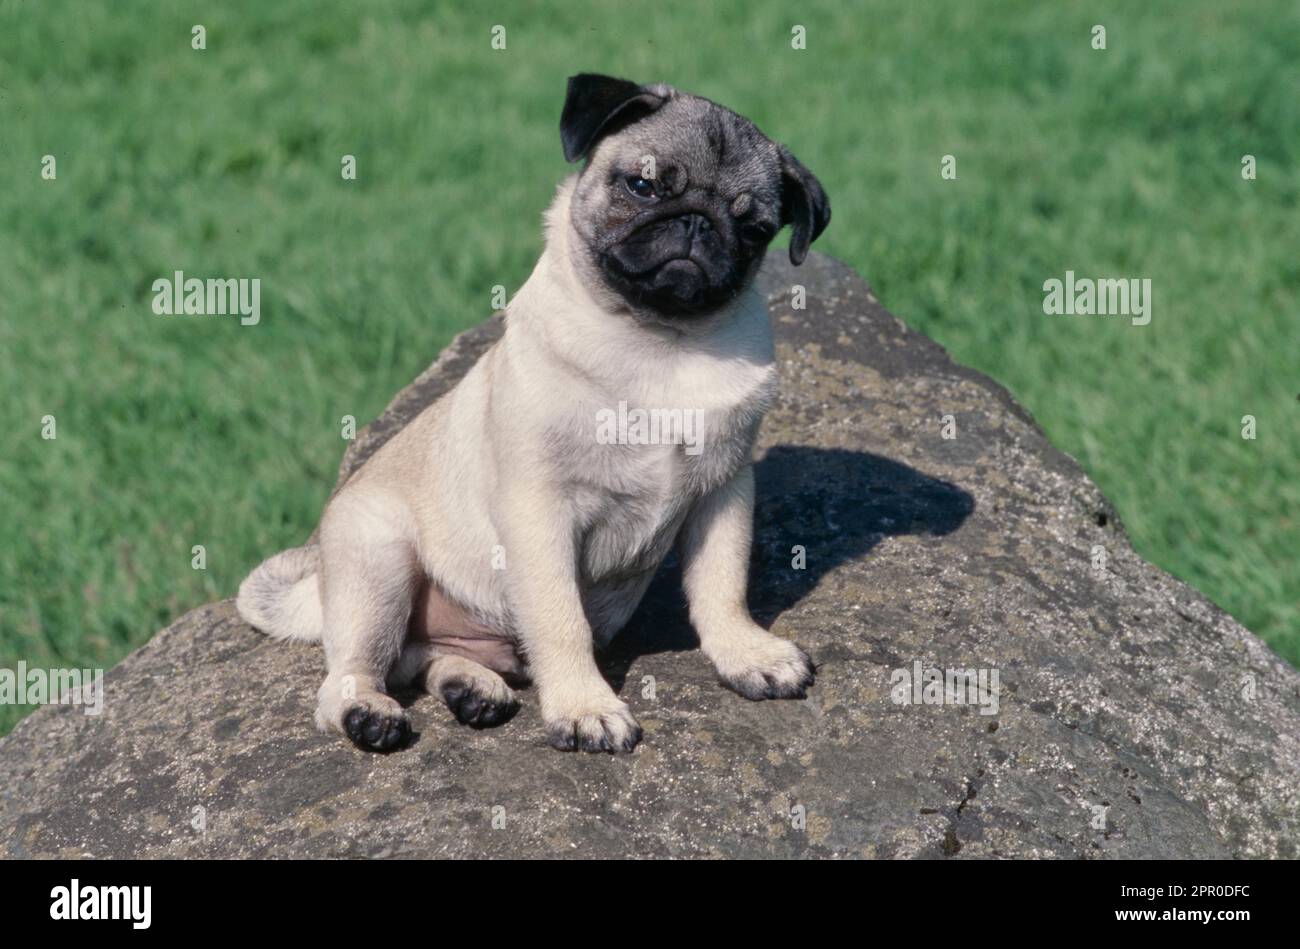 Pug puppy sitting on rock outside in grass Stock Photo